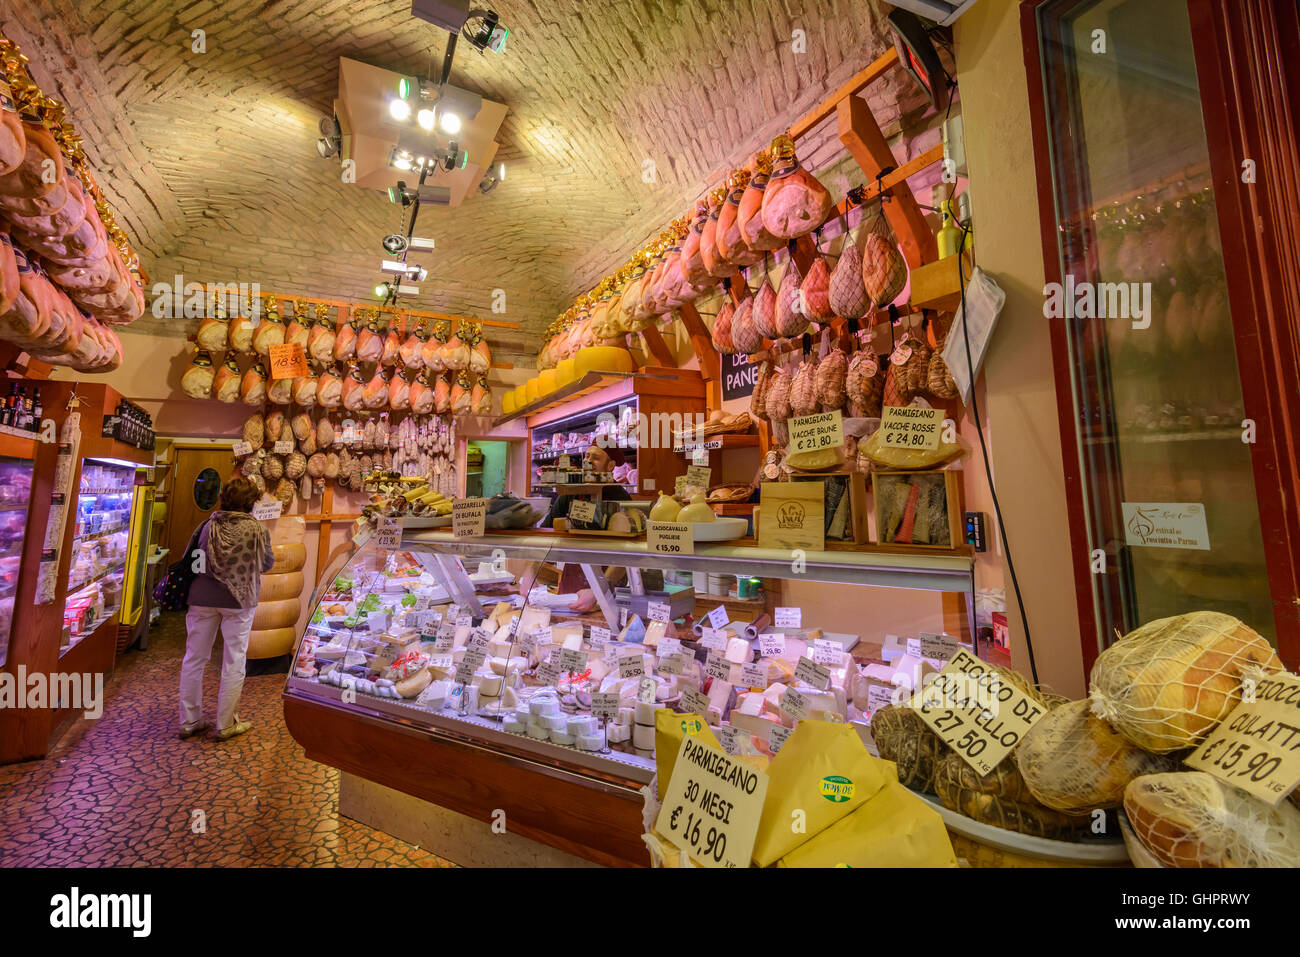 An Italian lady customer is browsing inside of a prosciutto (ham) and cheese shop in Parma, Italy Stock Photo